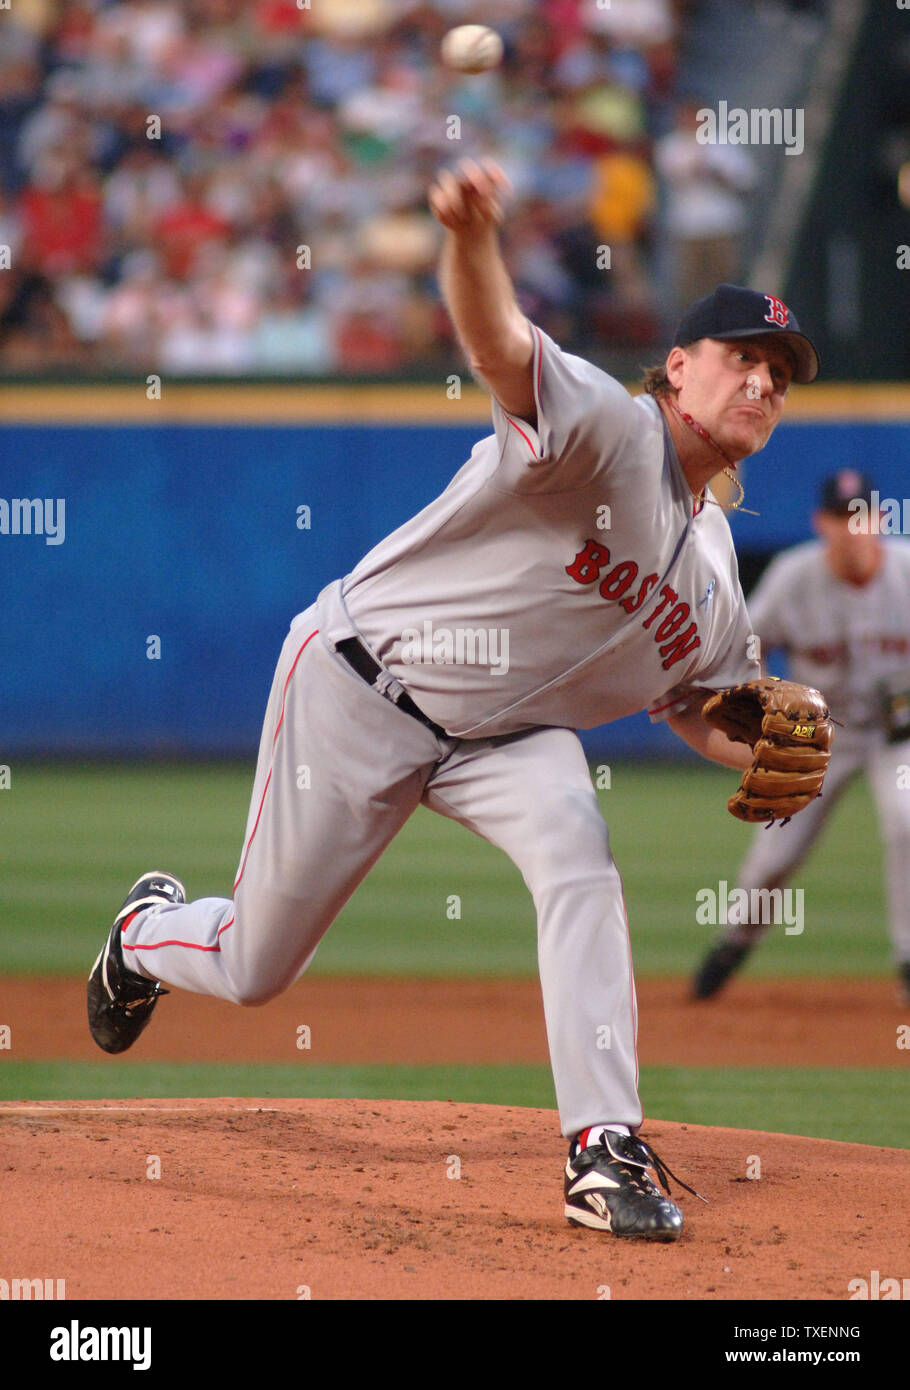 Boston Red Sox starting pitcher Curt Schilling  throws against the Atlanta Braves in the first inning June 18, 2006, in Atlanta's Turner Field. (UPI Photo/John Dickerson) Stock Photo